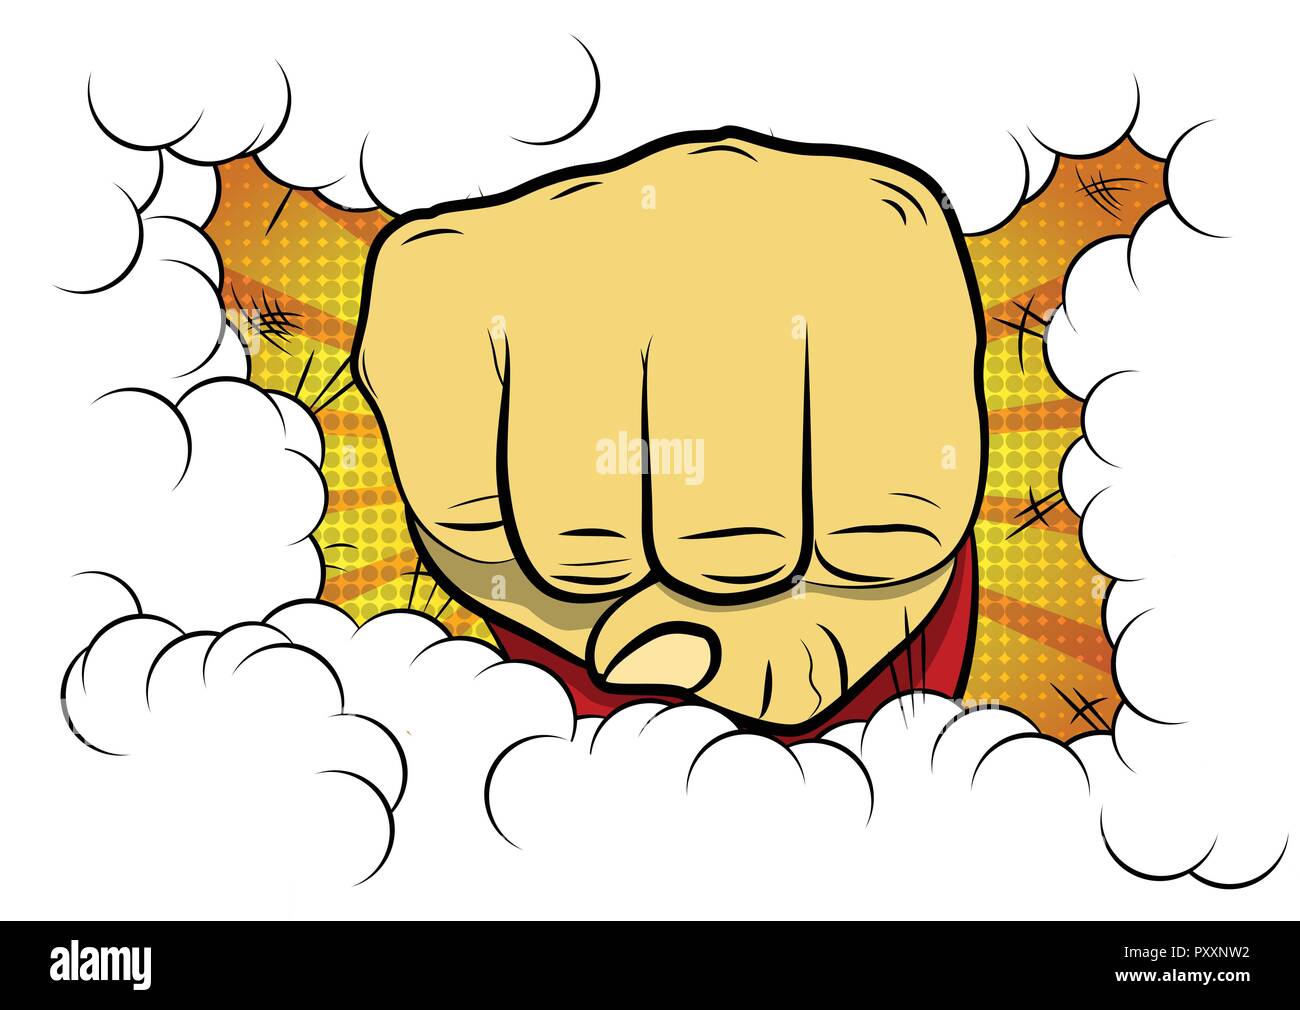 Vector illustrated comic book style cartoon clenched fist. Stock Vector